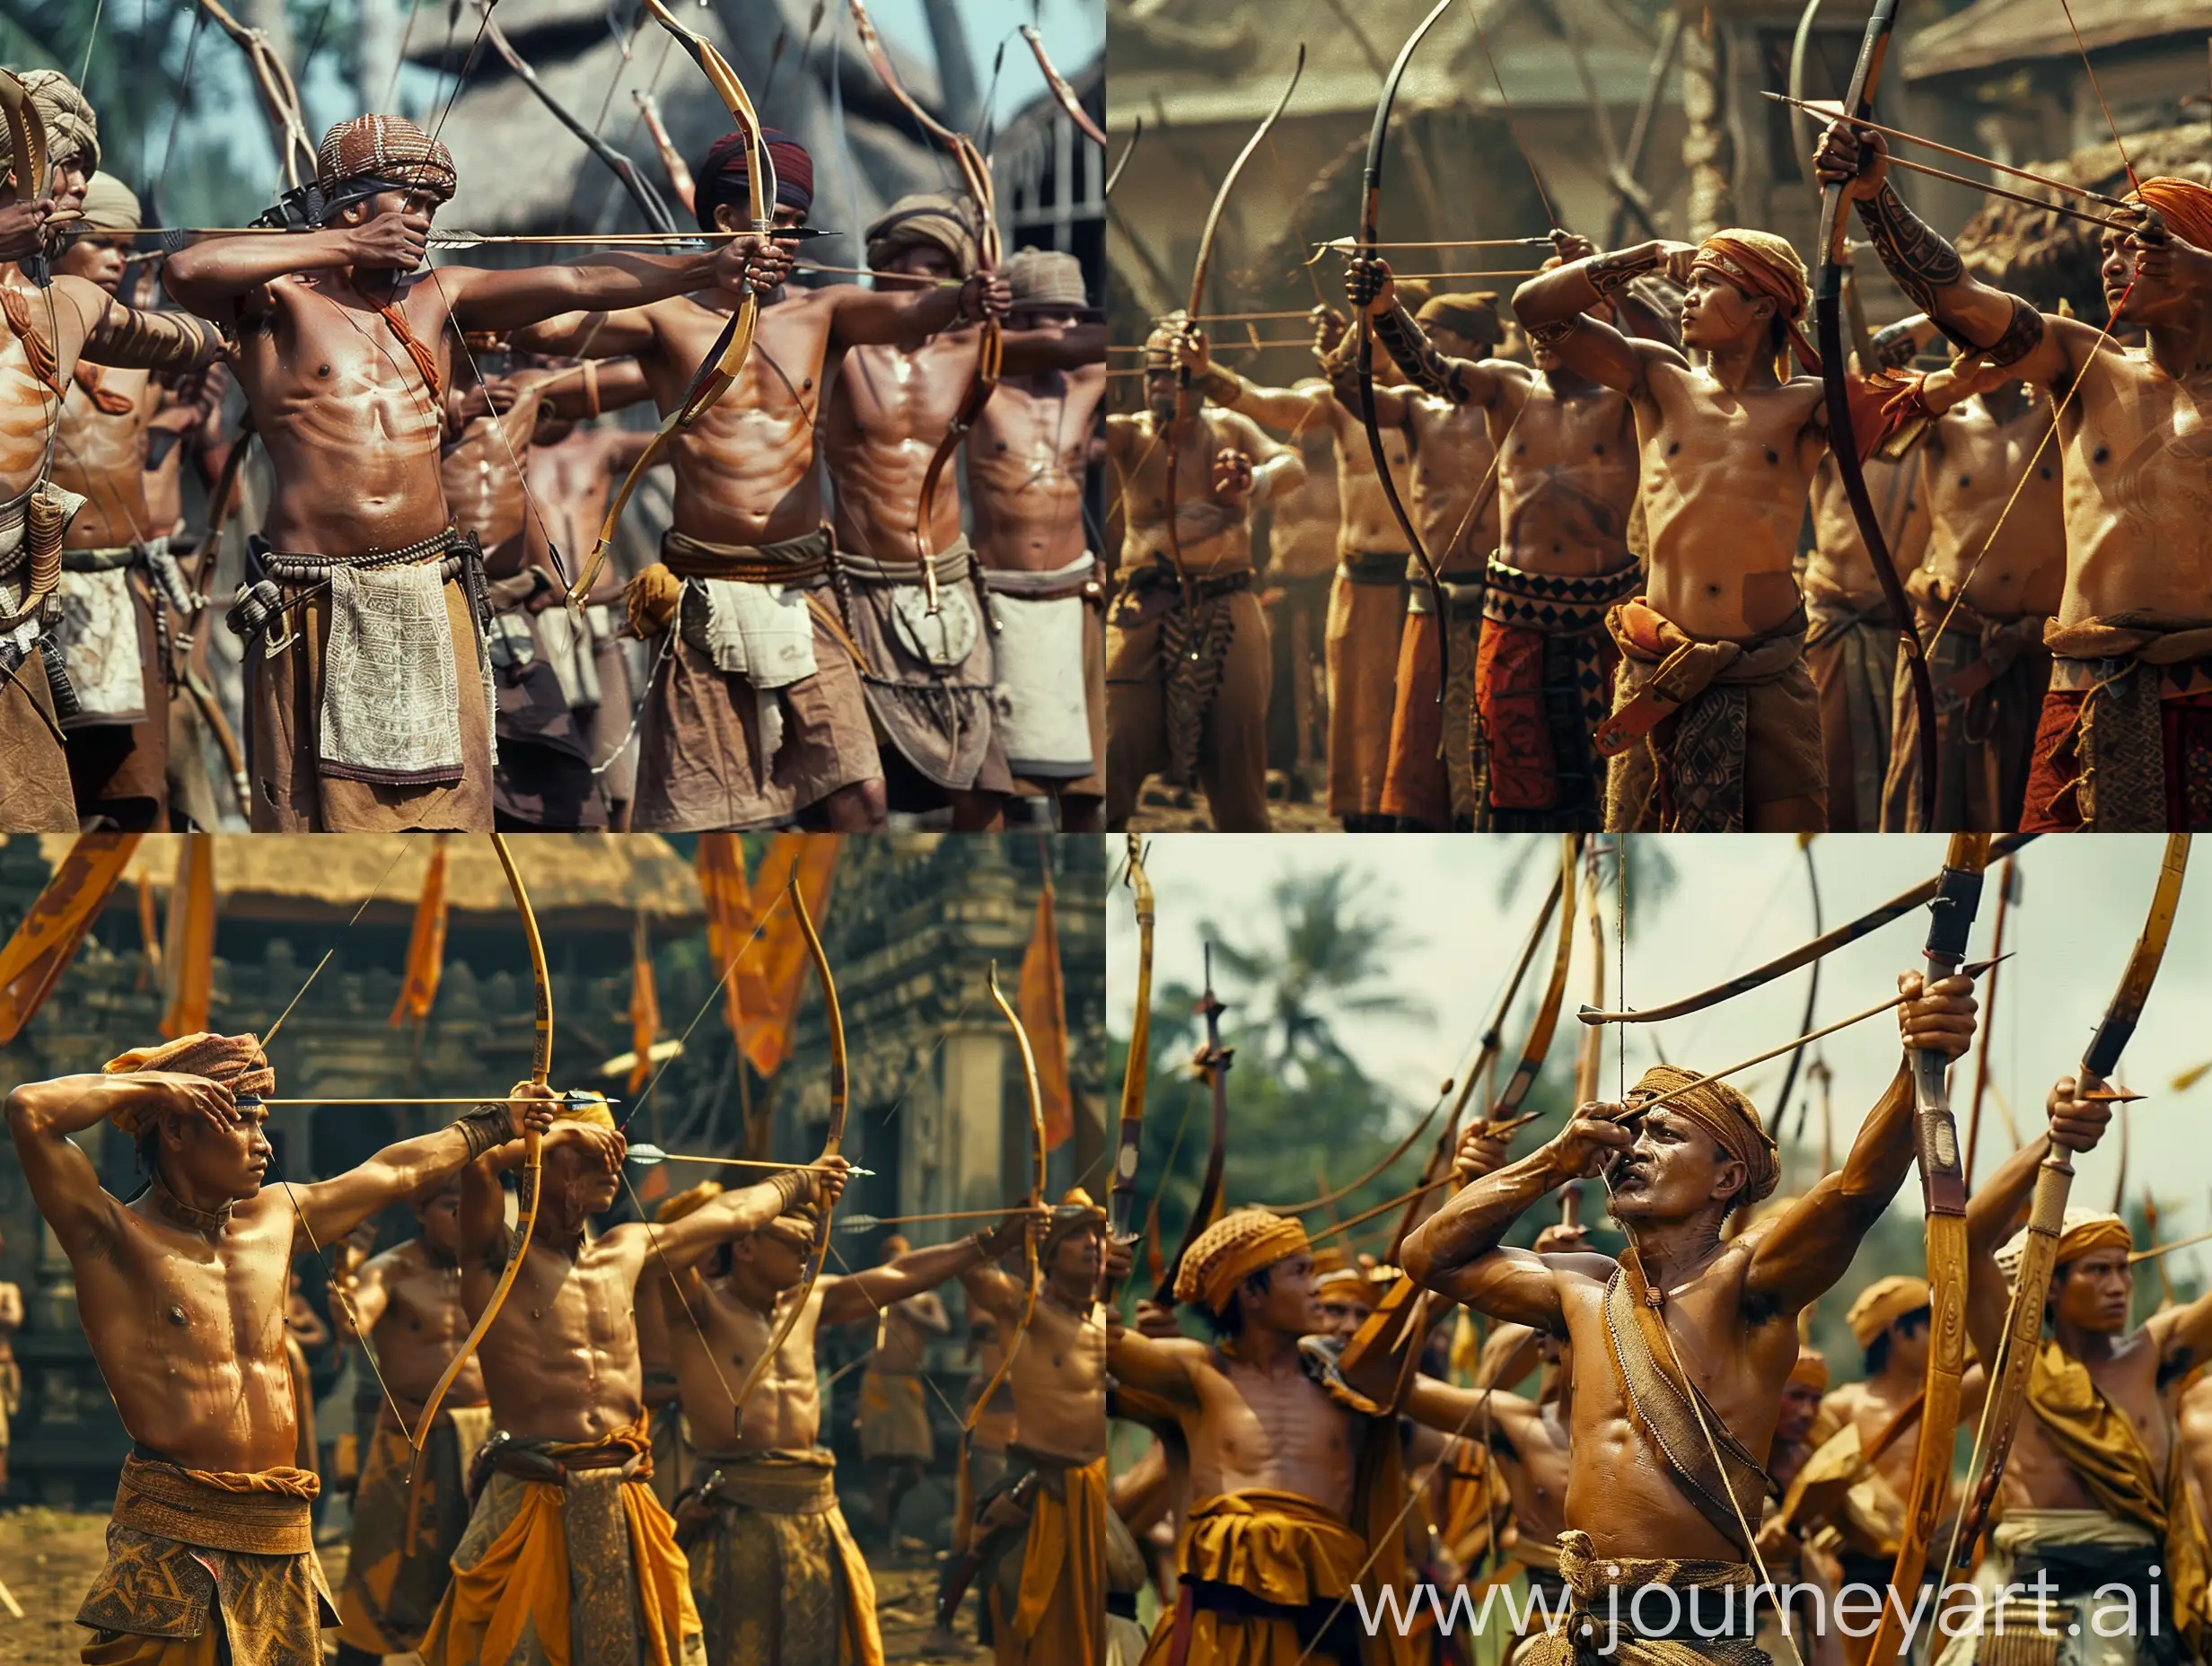 movie scene, Indonesian Majapahit kingdom war, Majapahit soldier archers, dressed in war clothes, without shirts, they aim arrows upwards